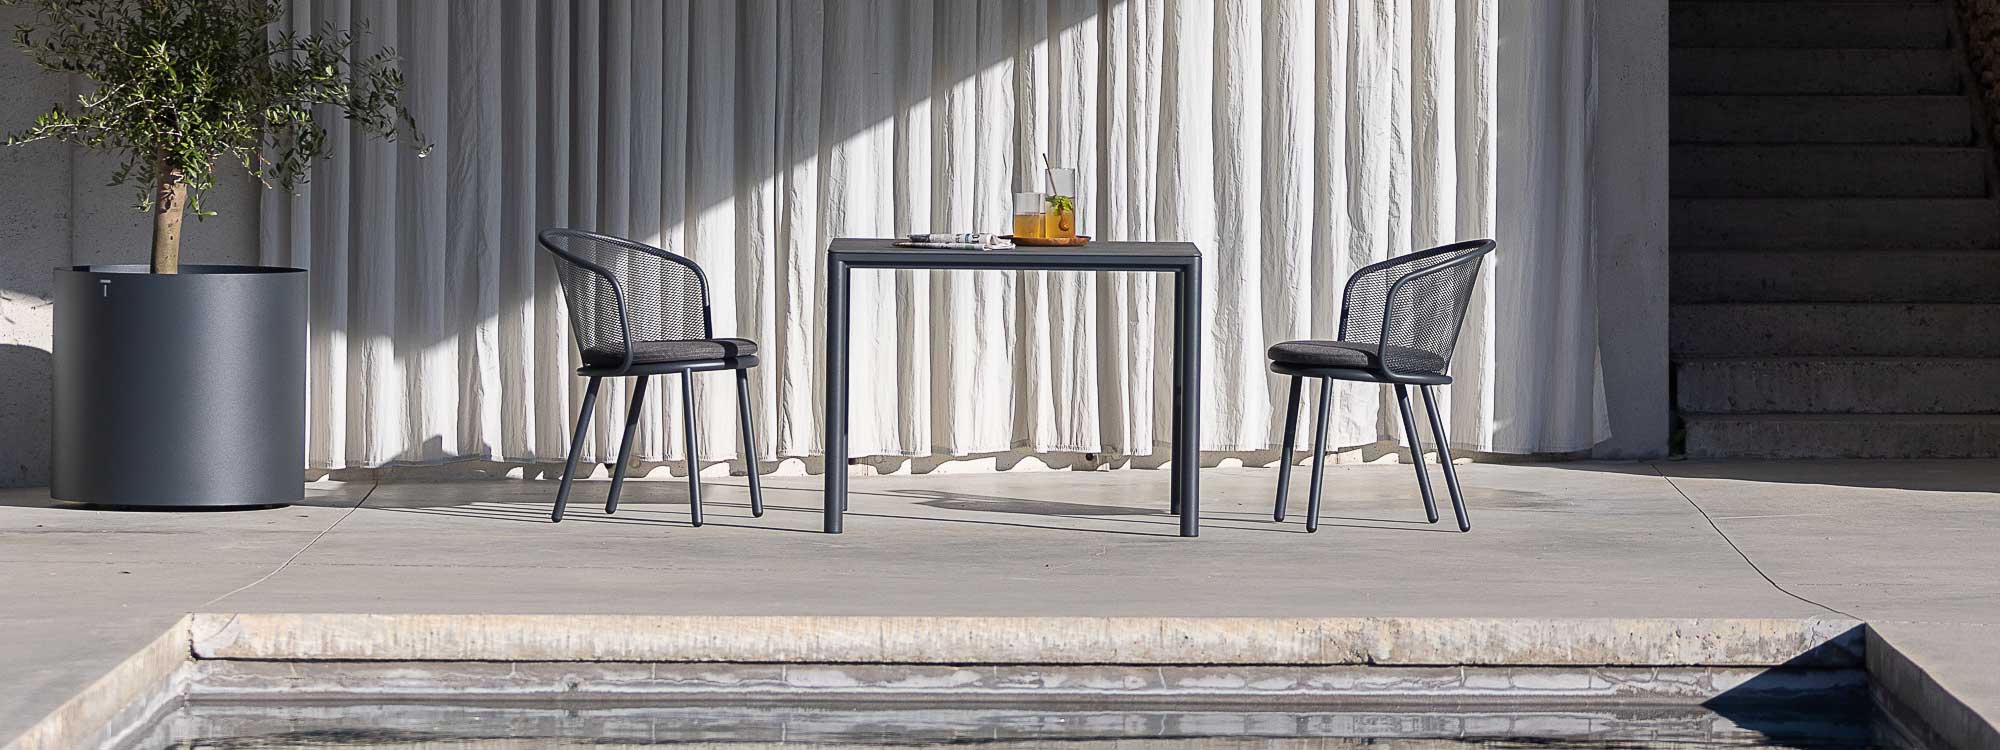 Image of Alca square garden table with Branta garden chairs by Todus on sunny terrace